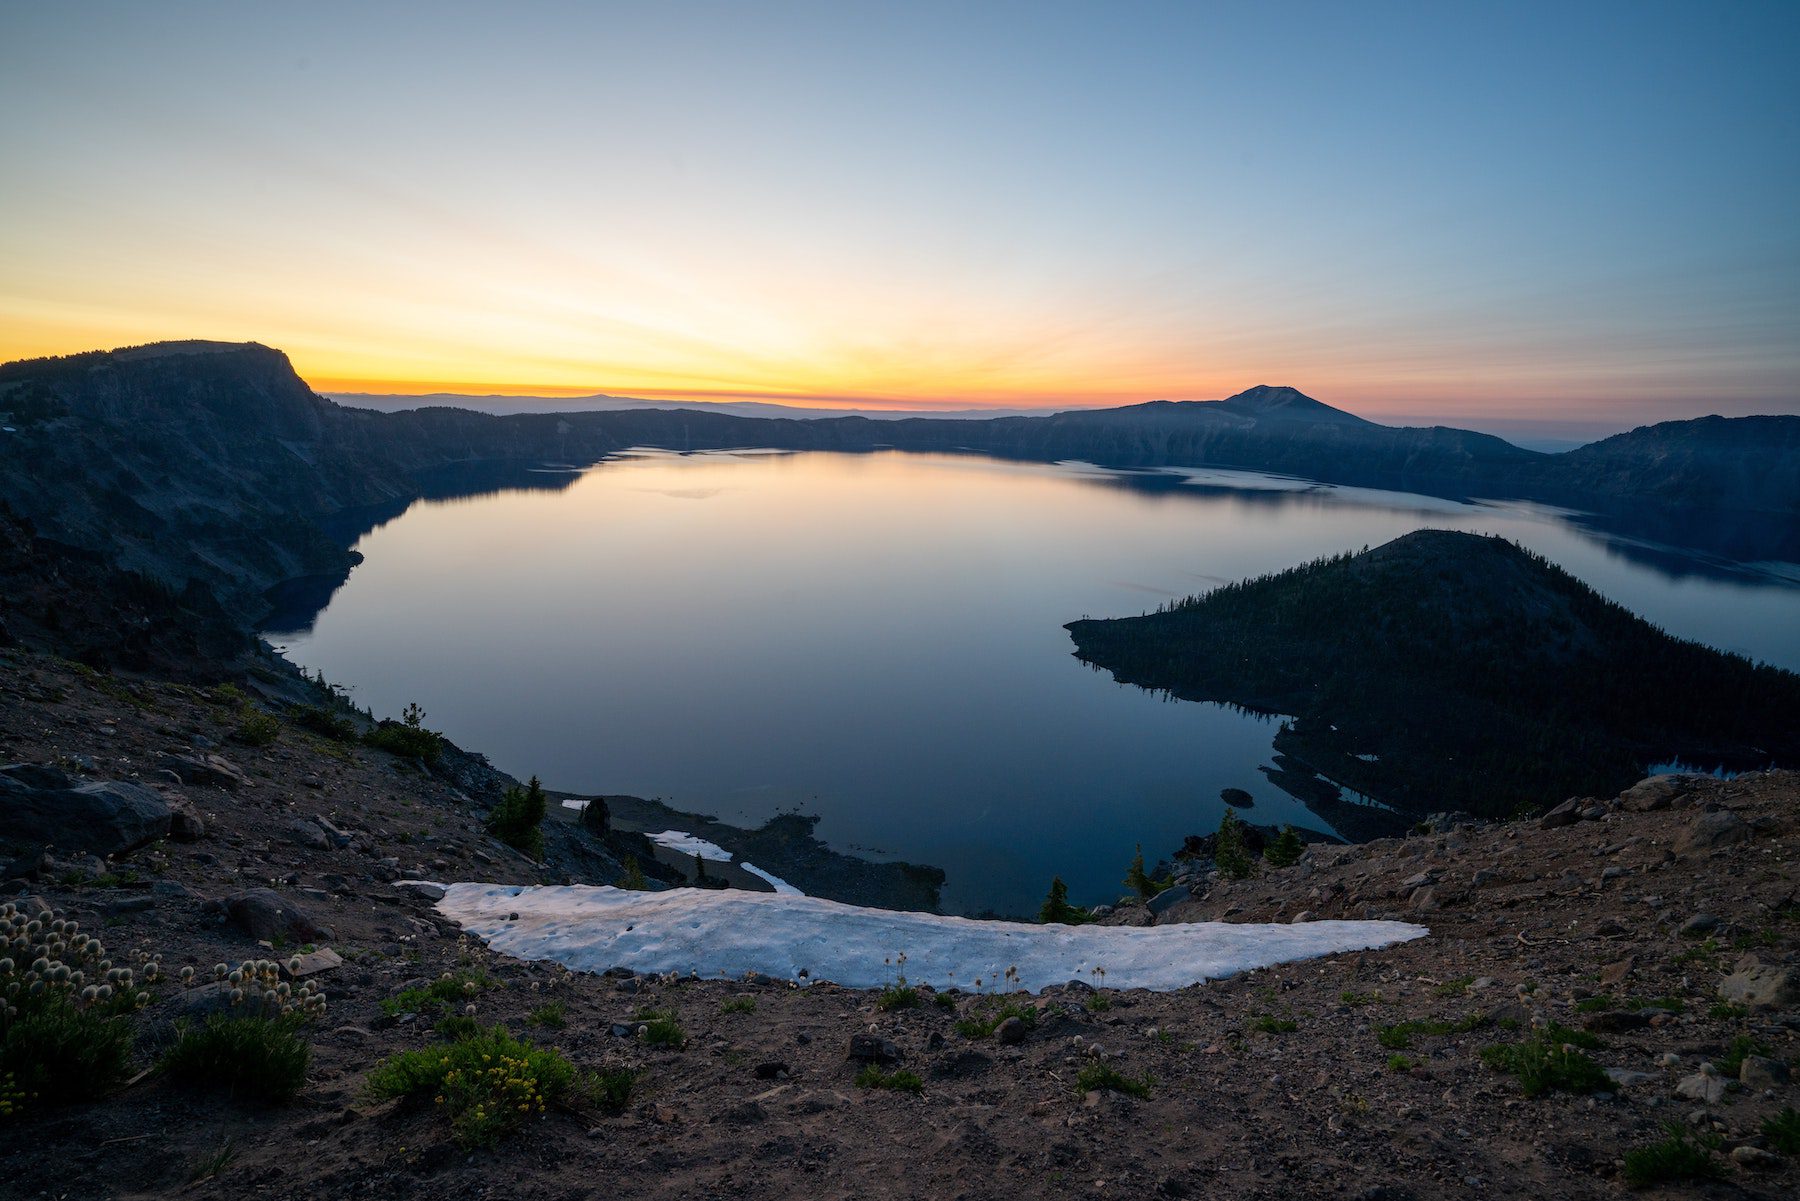 Sunrise over Crater Lake, a caldera in the national parks system, during the spring or summer season. 